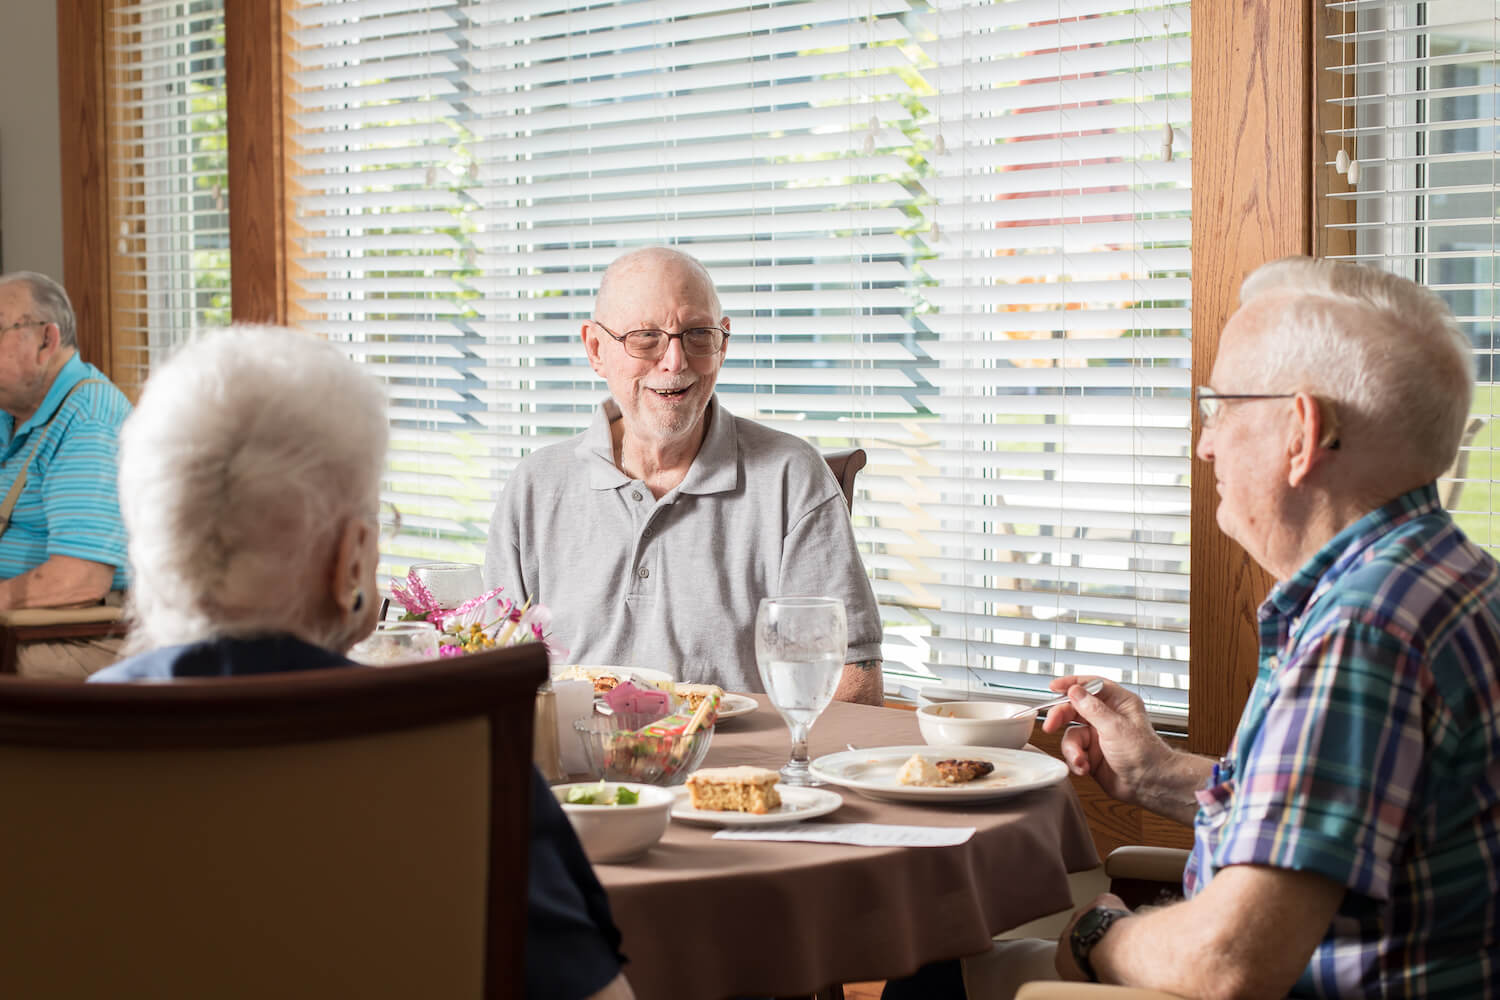 Residents dining together